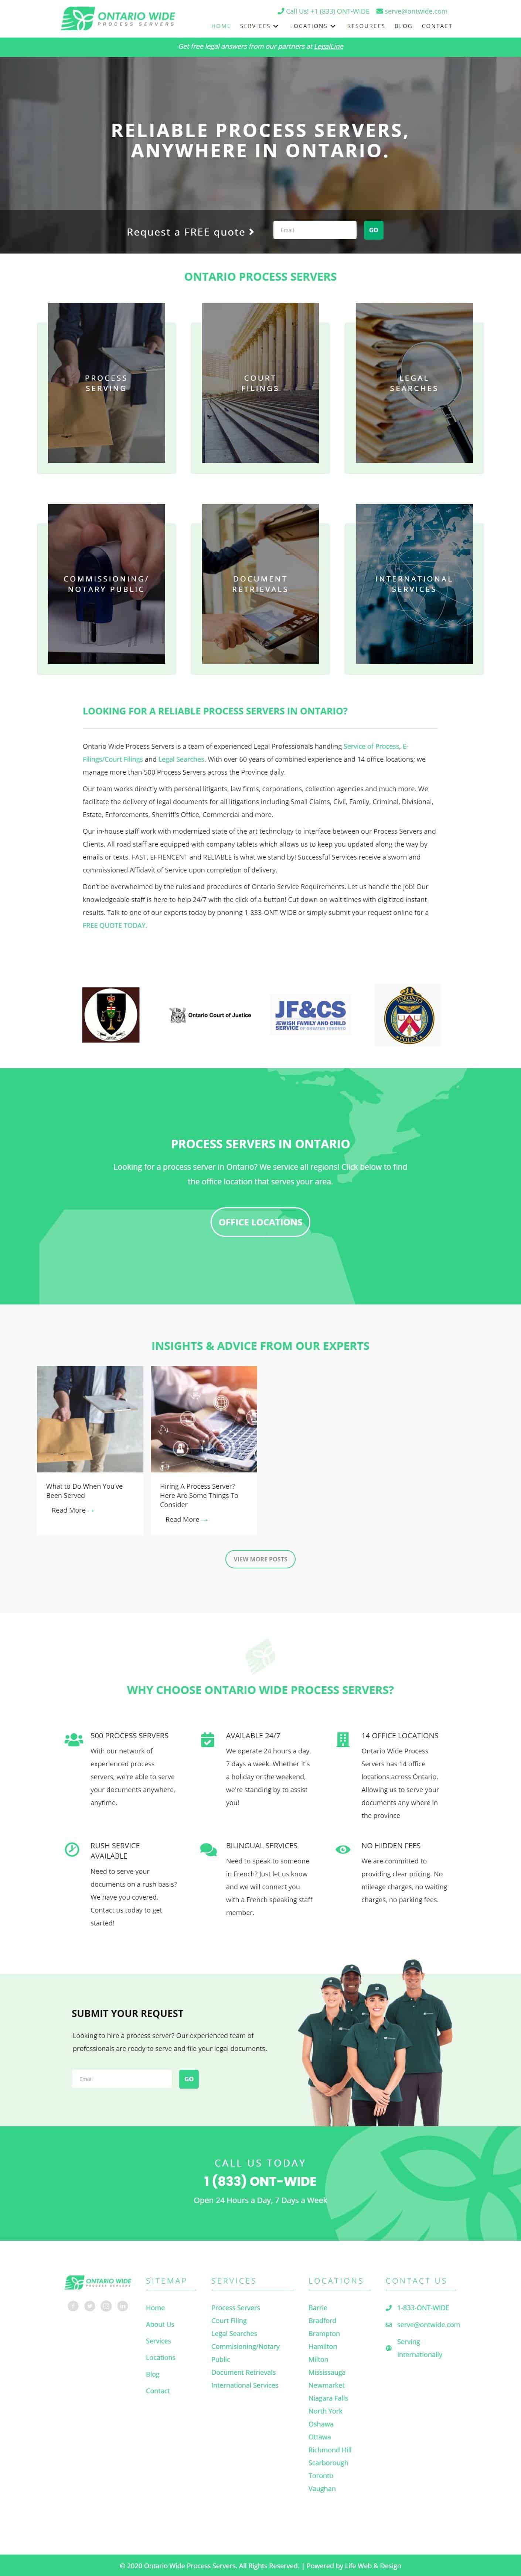 web design project for process serving company in Toronto